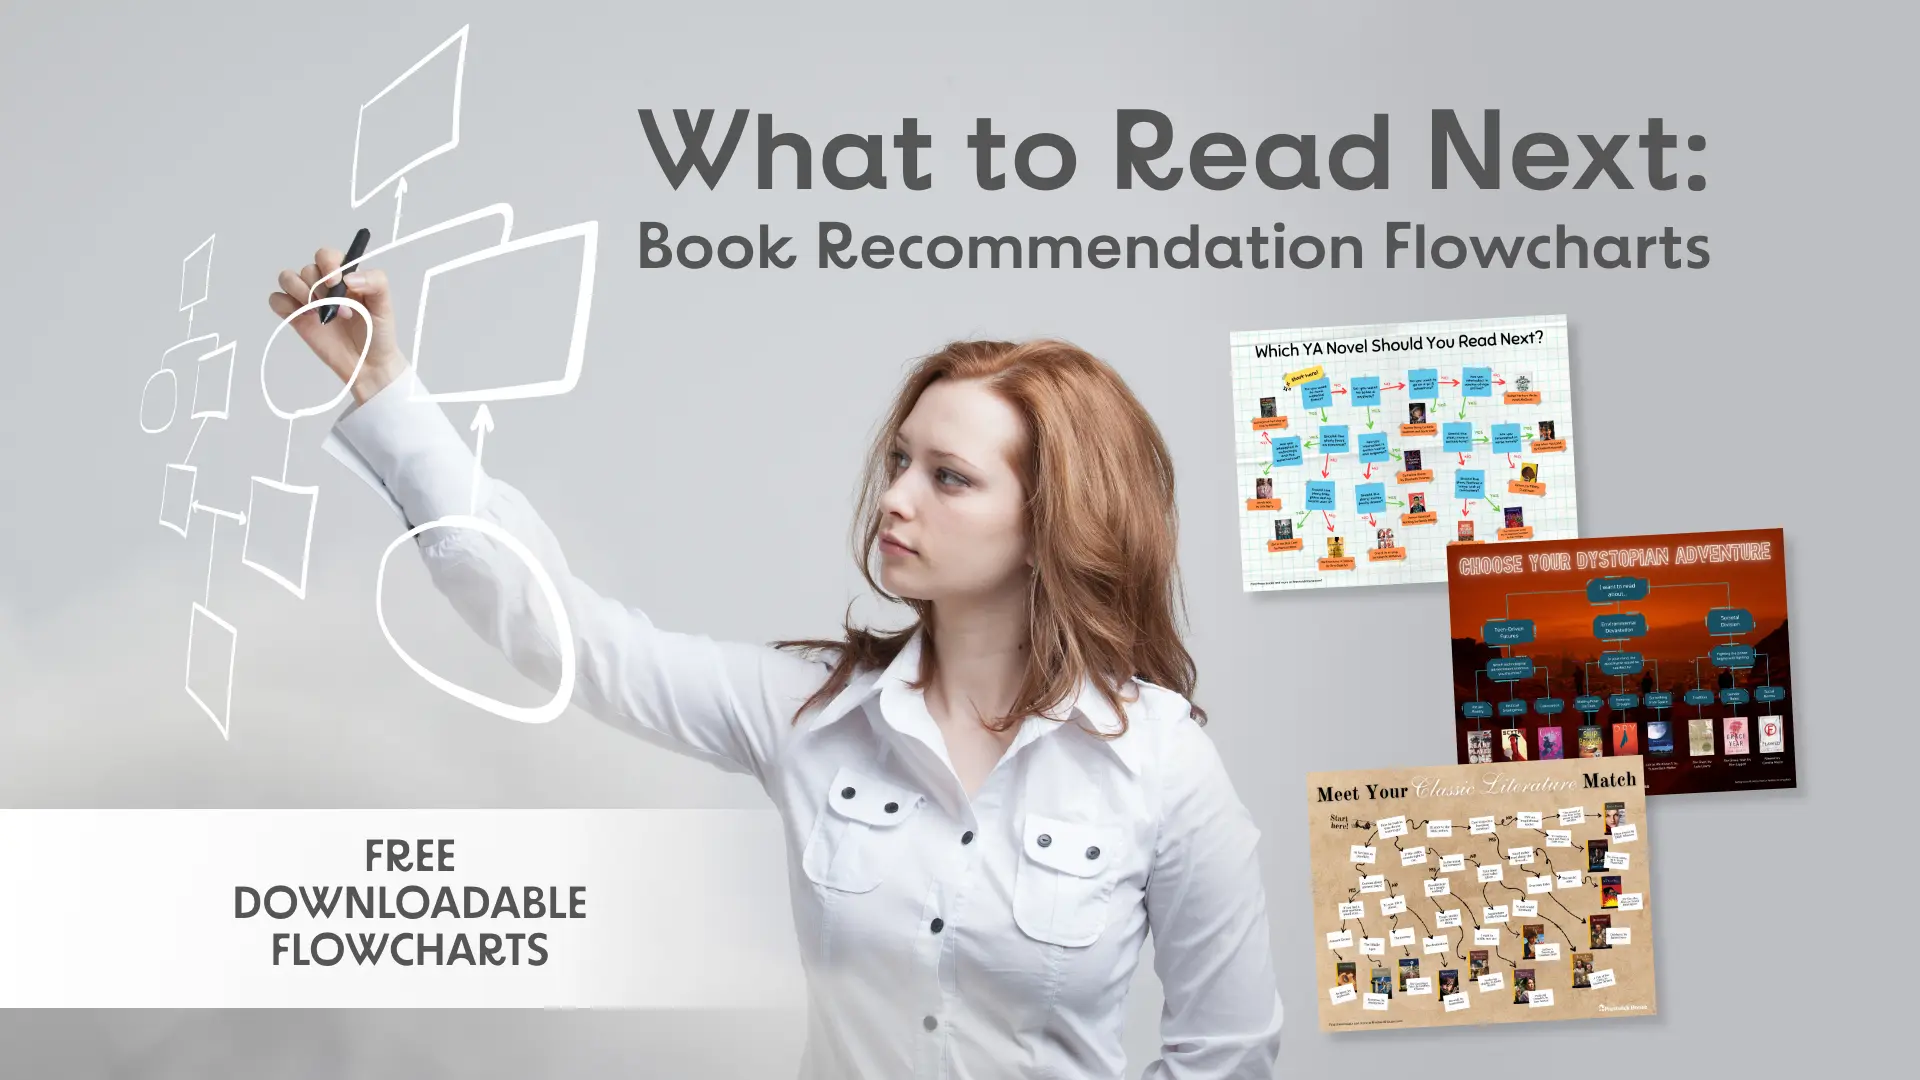 What to Read Next: Book Recommendation Flowcharts